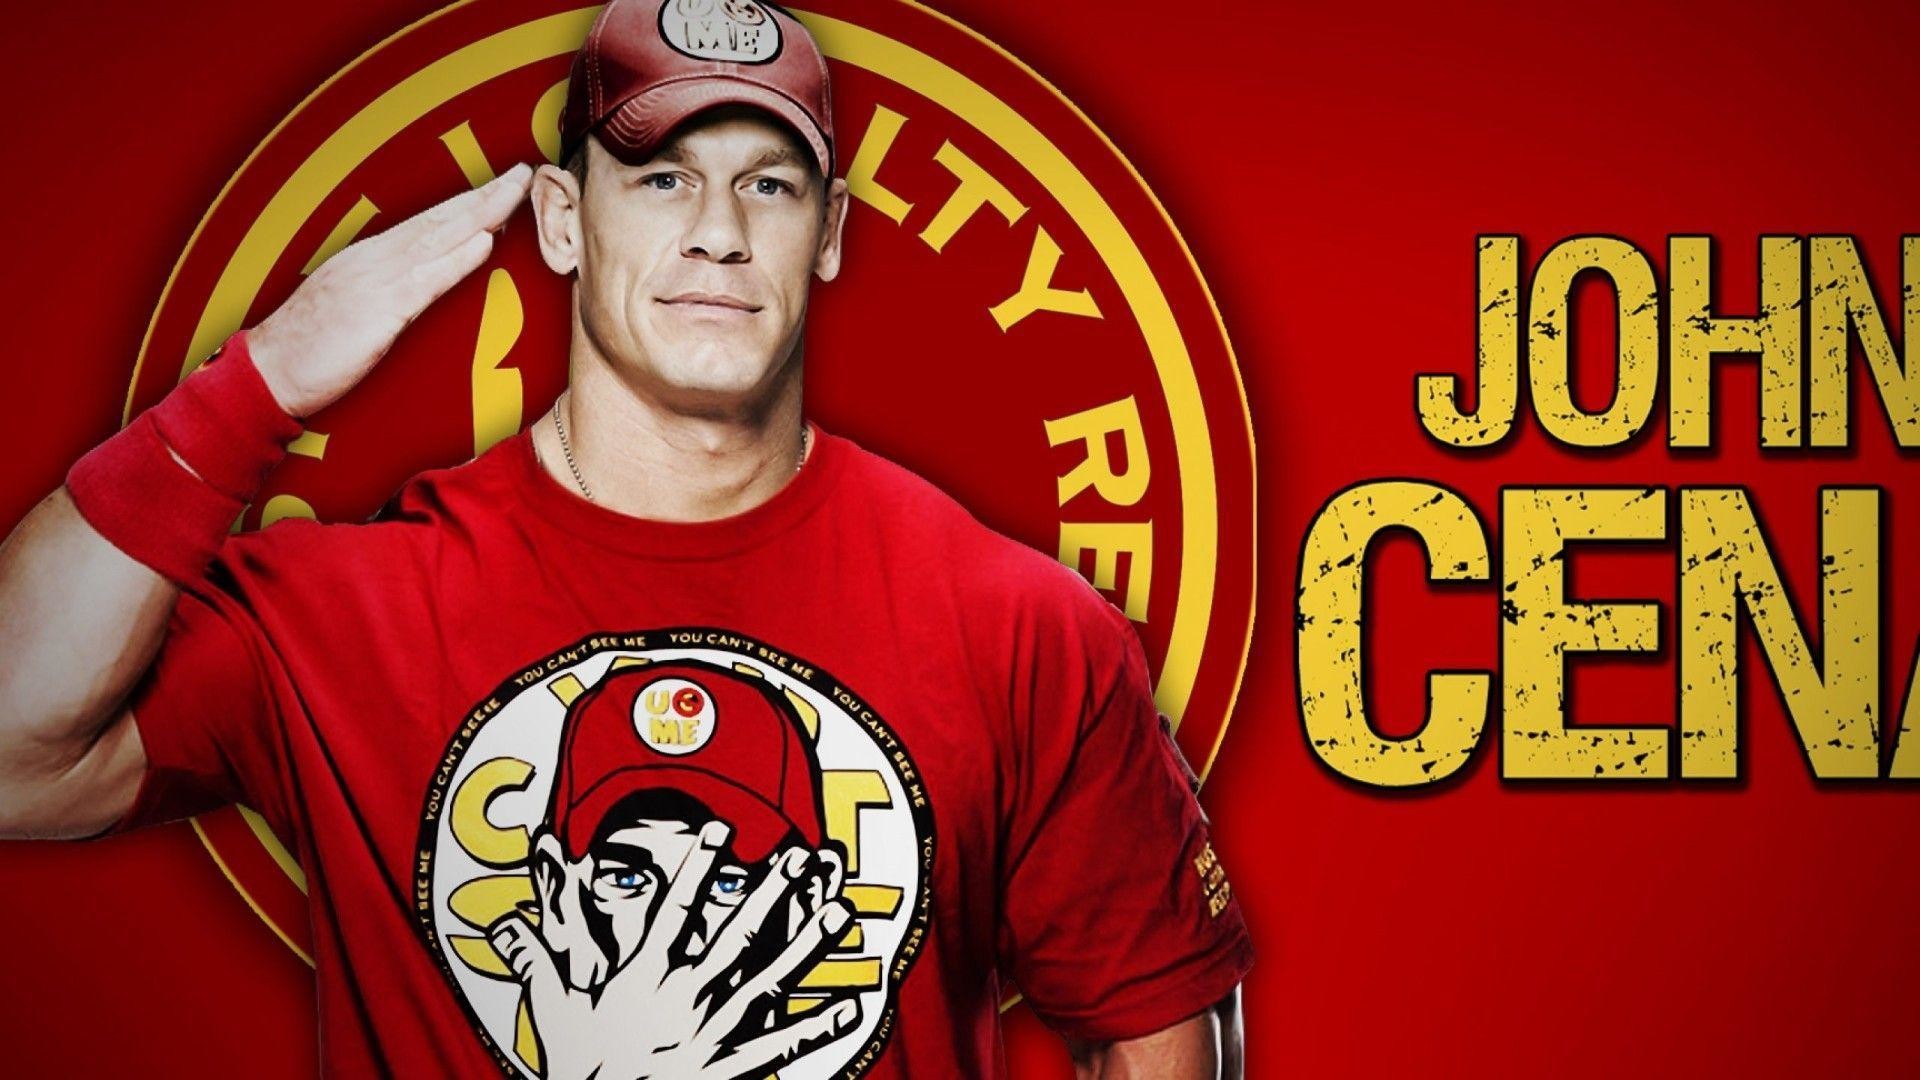 John Cena 2018 HD Wallpapers 70 pictures